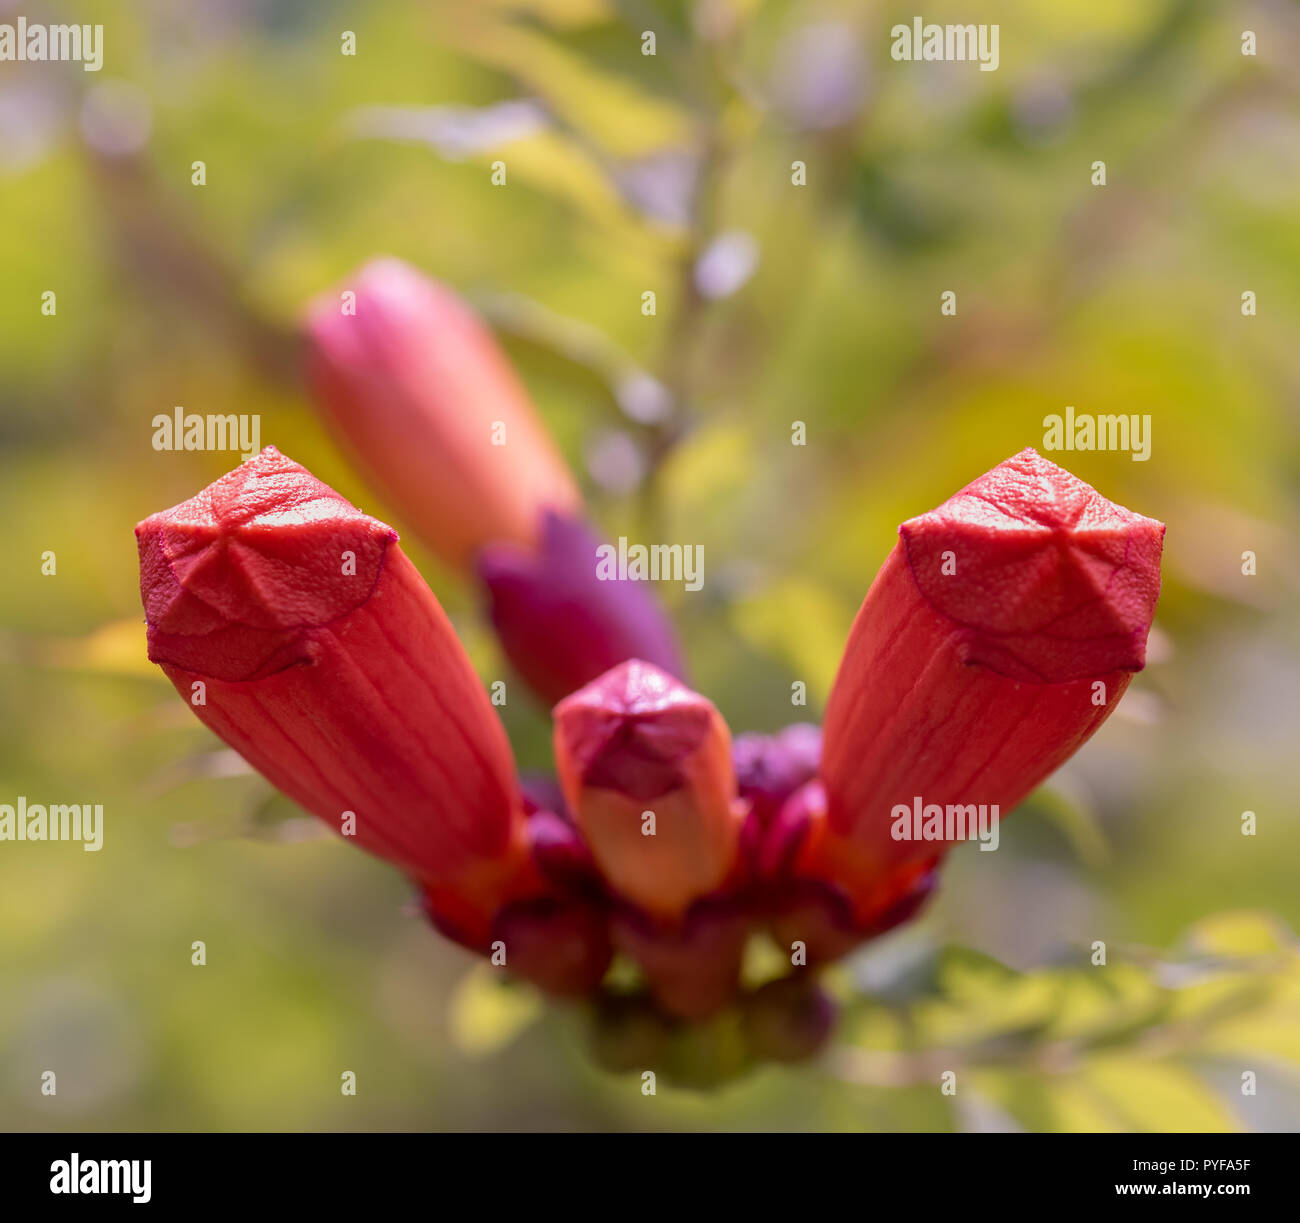 Fine art still life color outdoor floral macro image of a branch of  isolated orange red violet  trumpet creeper blossom buds on natural blurred green Stock Photo